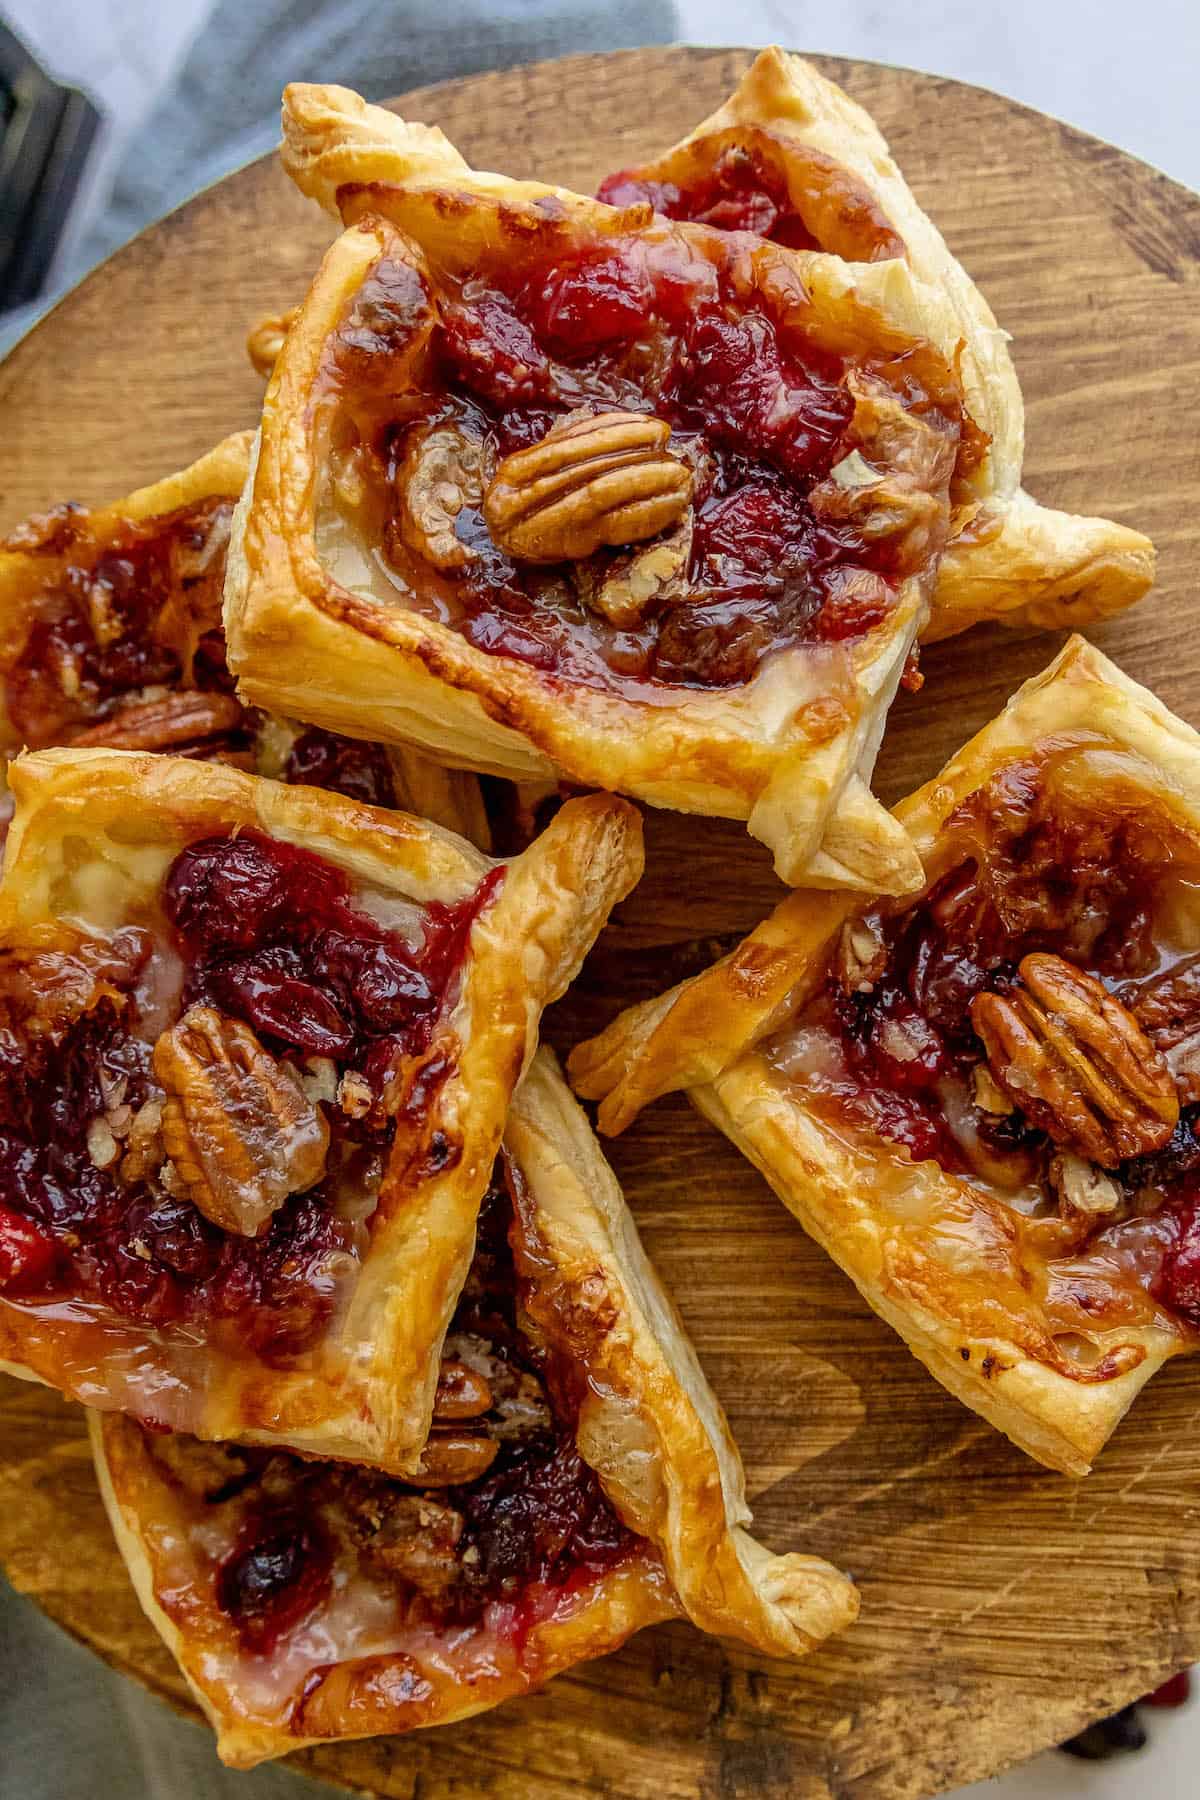 Cranberry pecan tarts and cranberry brie bites on a wooden cutting board.